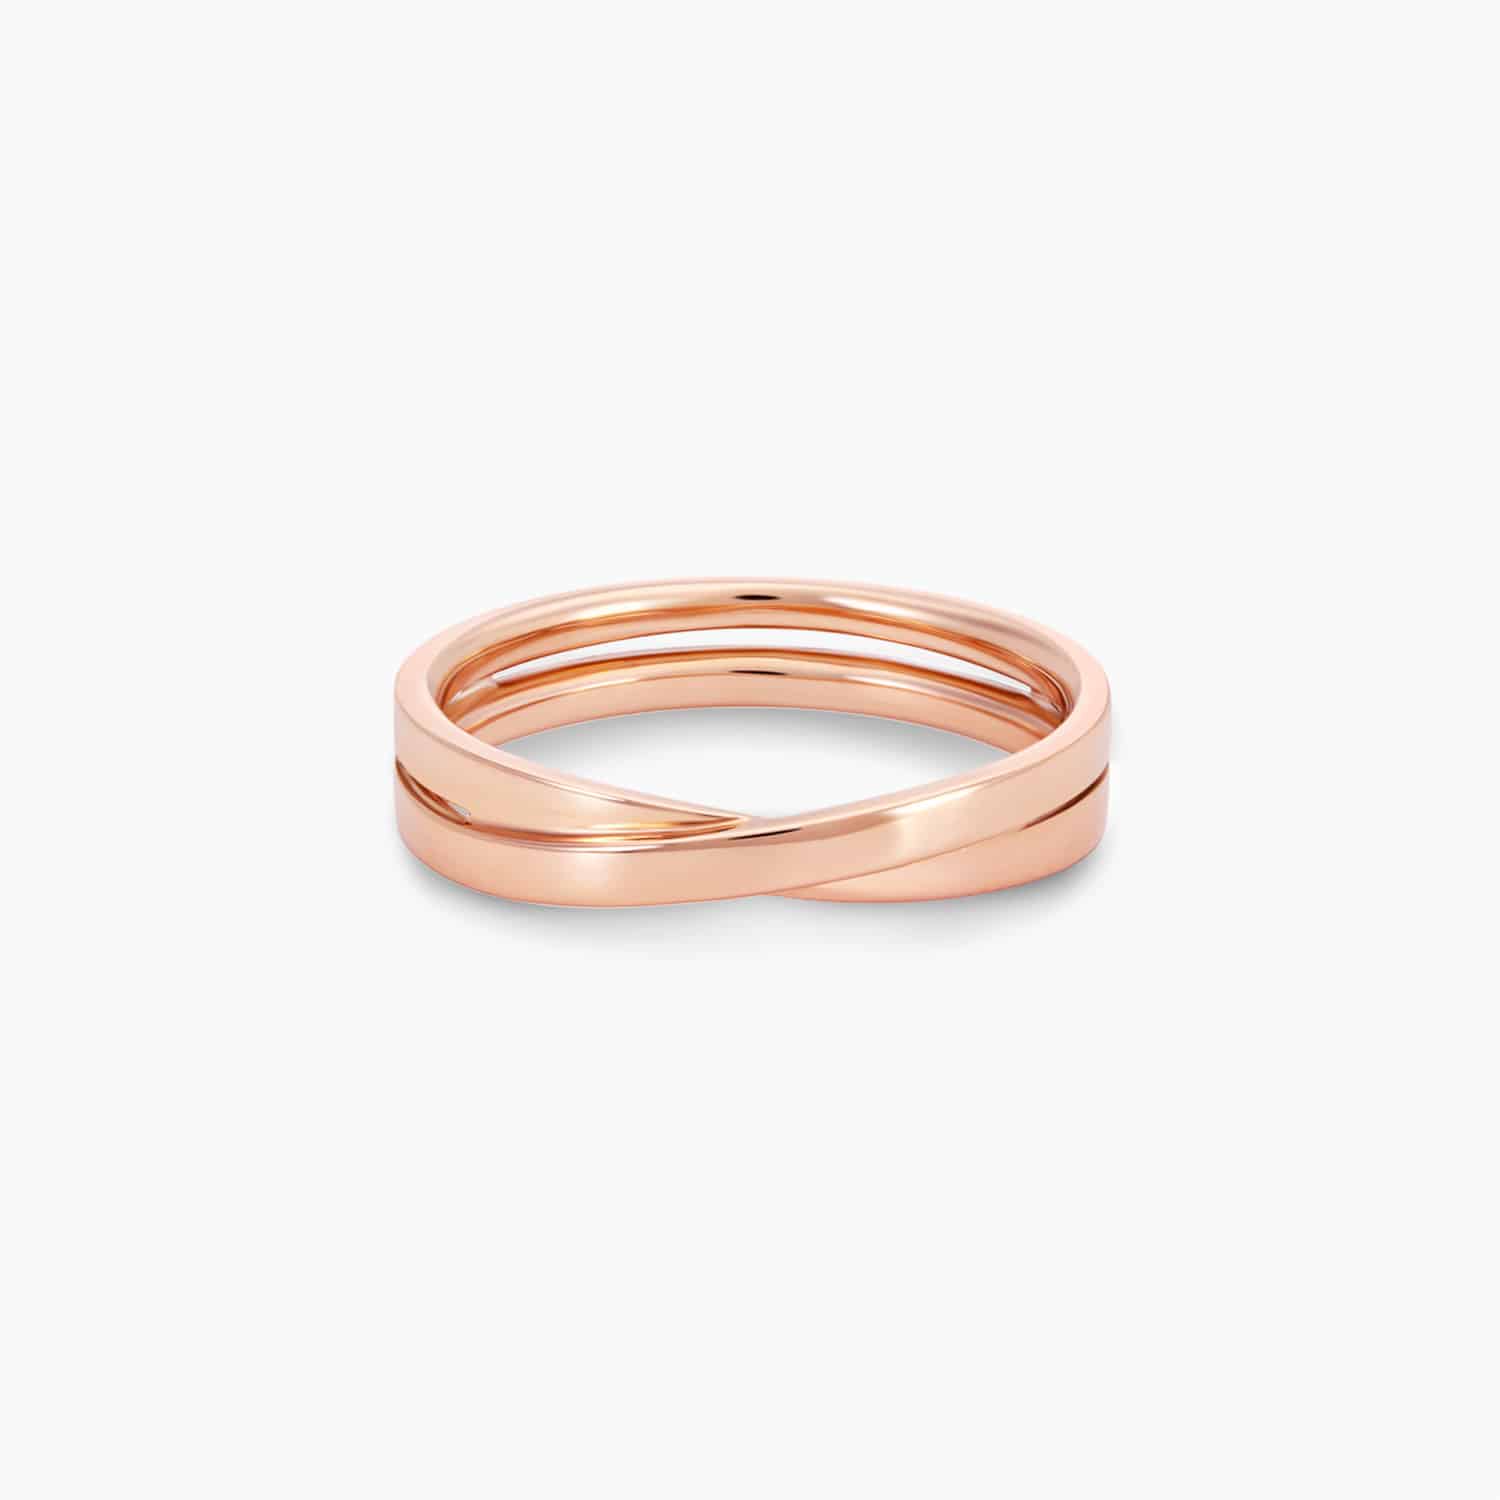 LVC Desirio Cross Wedding Band for men in Rose Gold with Glossy Finish